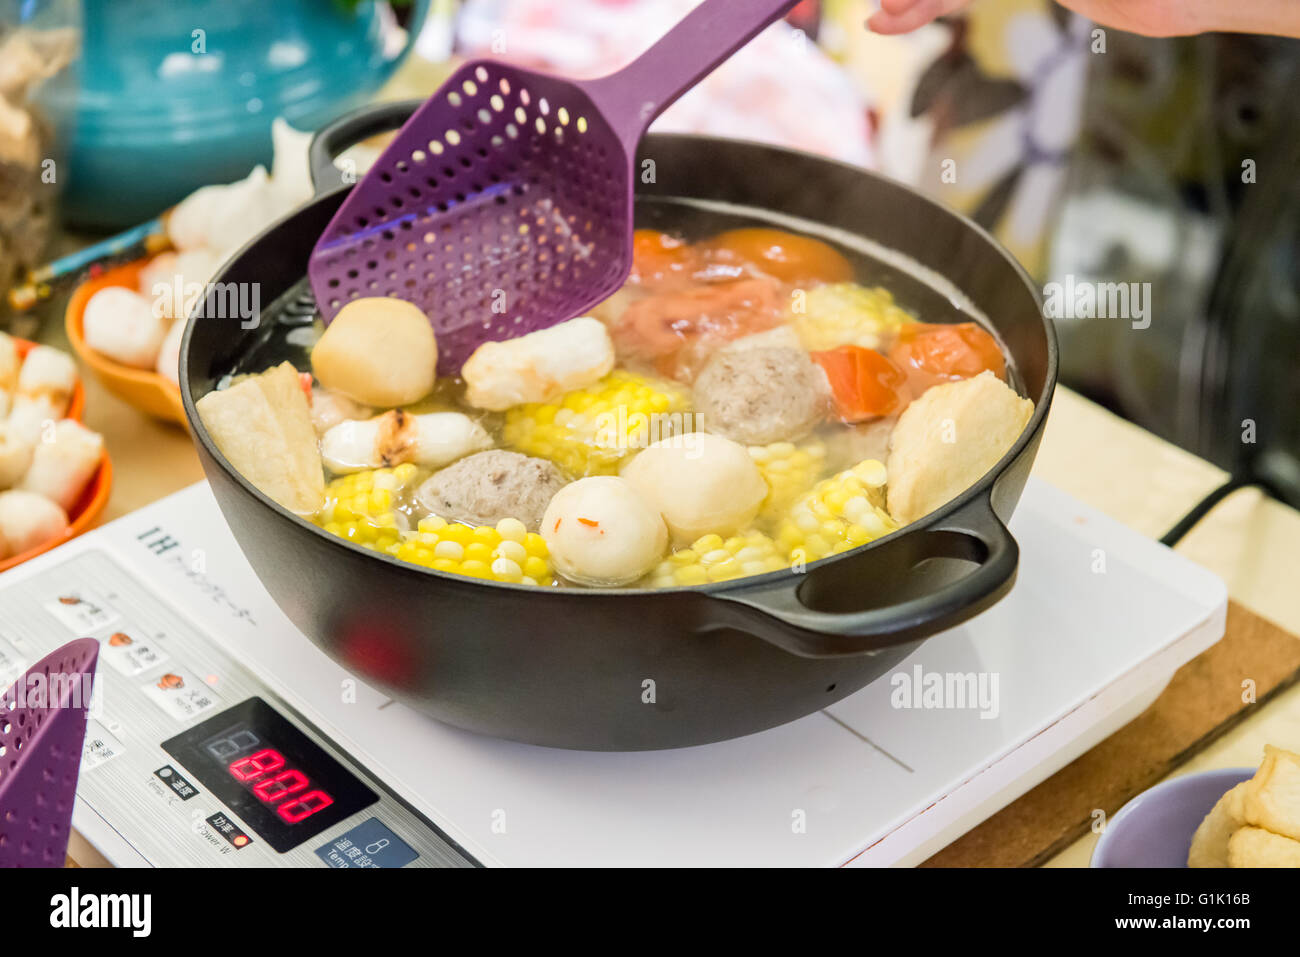 traditional style of hot pot cooking in Asian countries Stock Photo